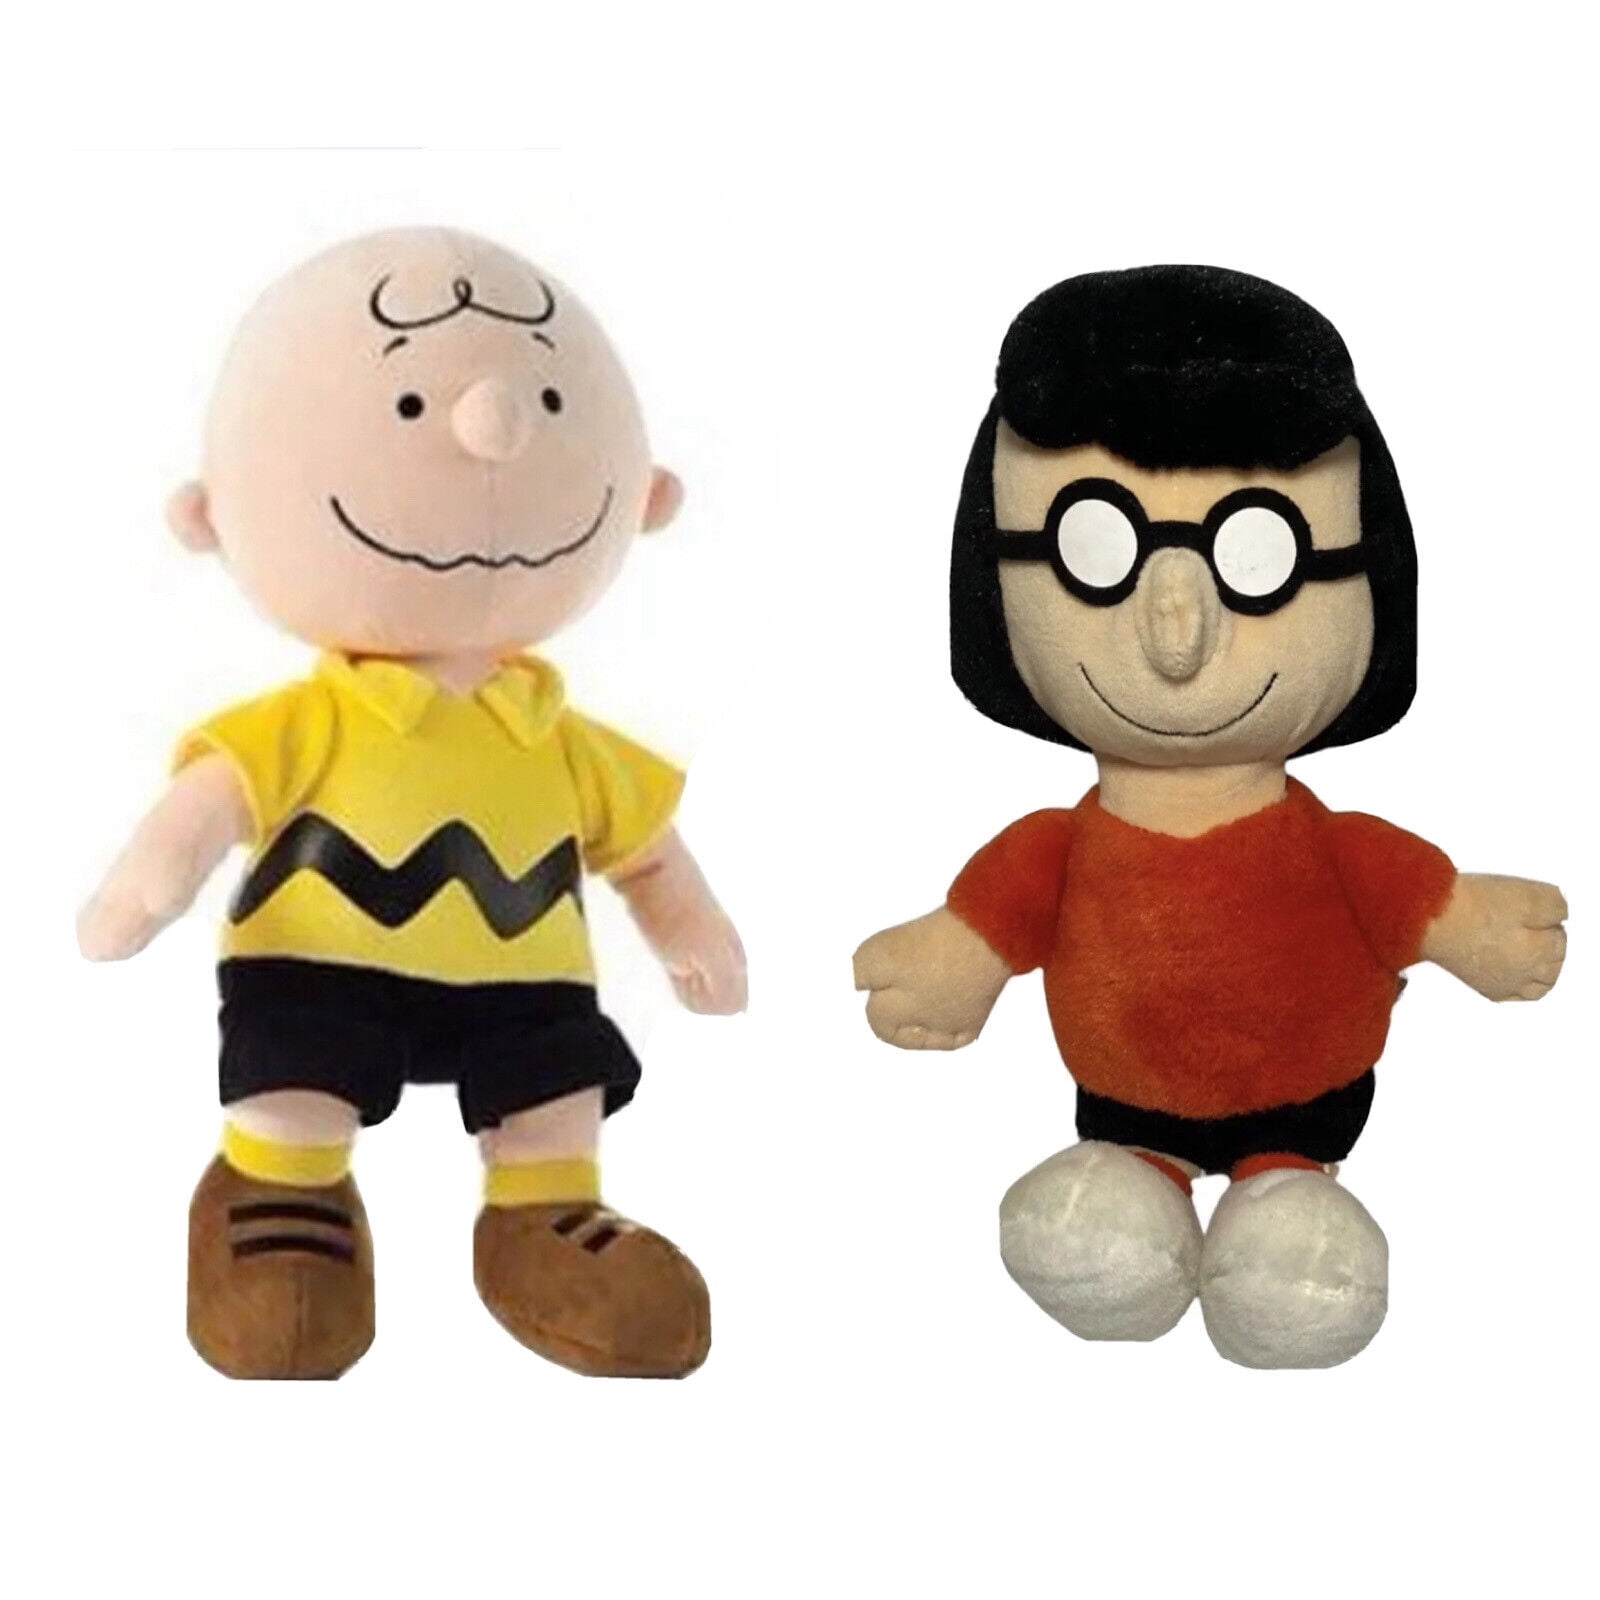 Plush 12 Marcie Marcy Girl And Chuck Charlie Brown Set Peanuts Rare Doll Snoopy New